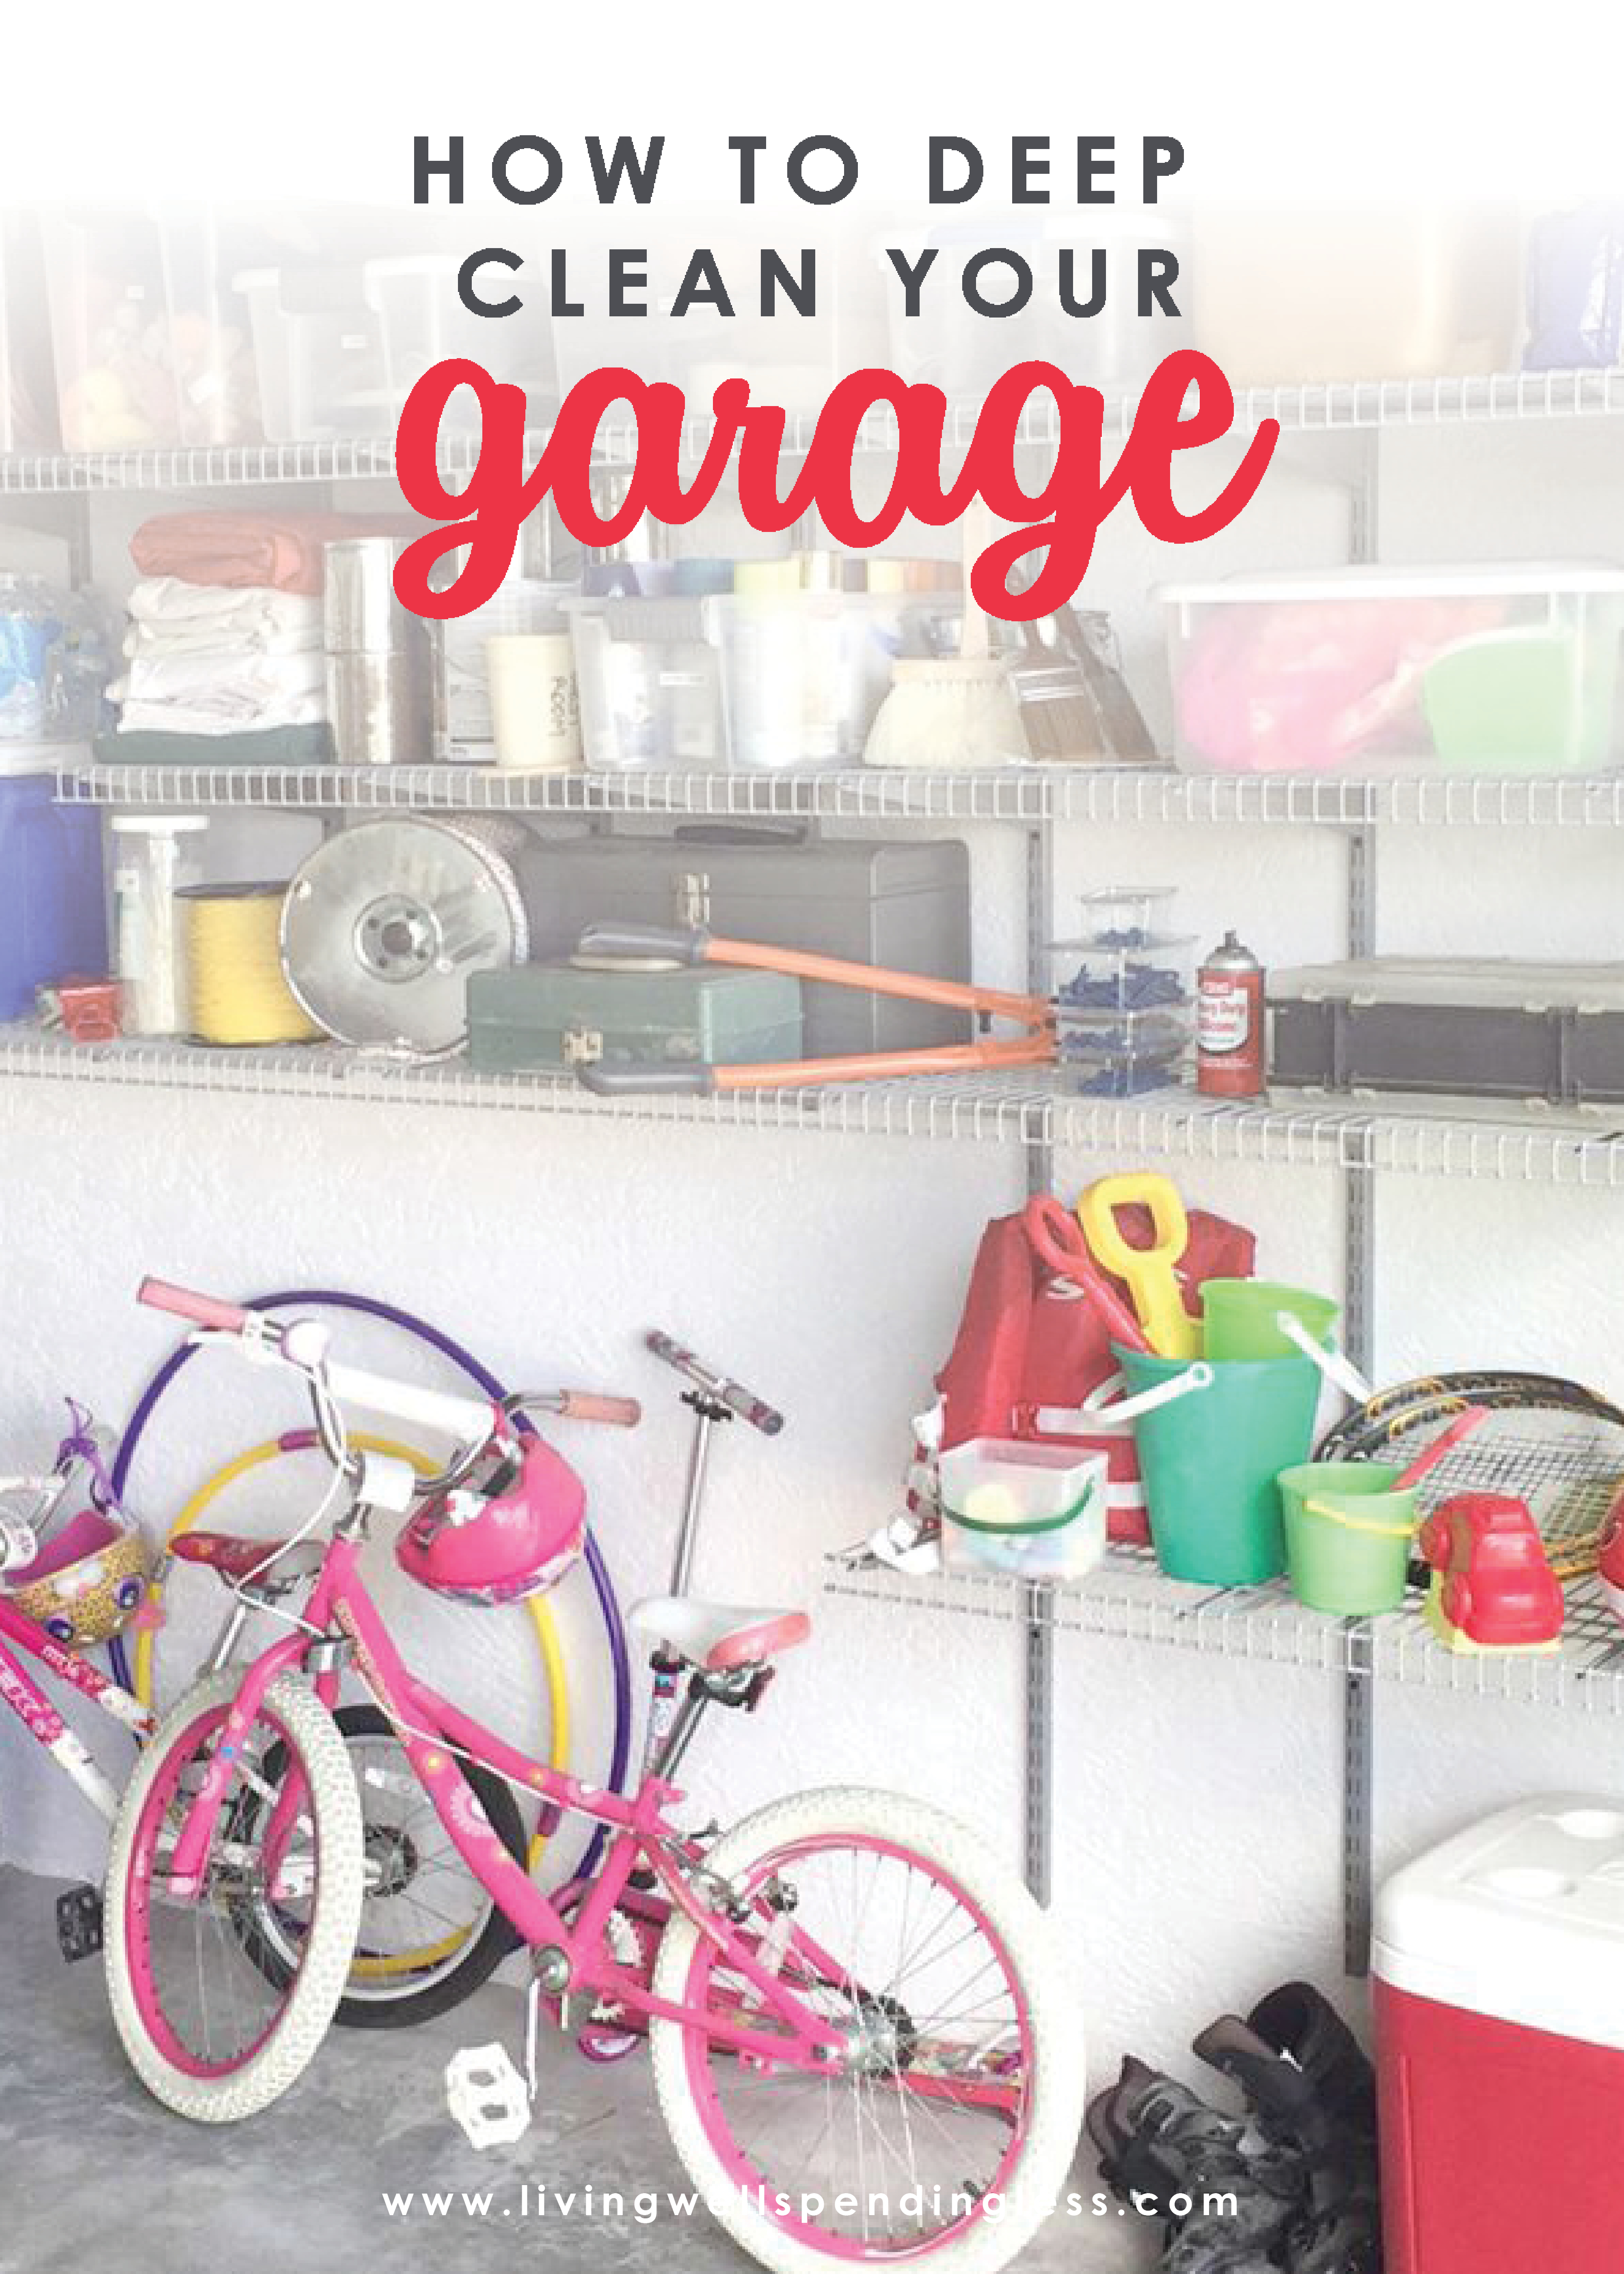 ver feel like your garage has reached the point of no return? We did too until one day we just couldn't it anymore! Find out how we finally tamed the chaos in just six simple steps--and how you can too!